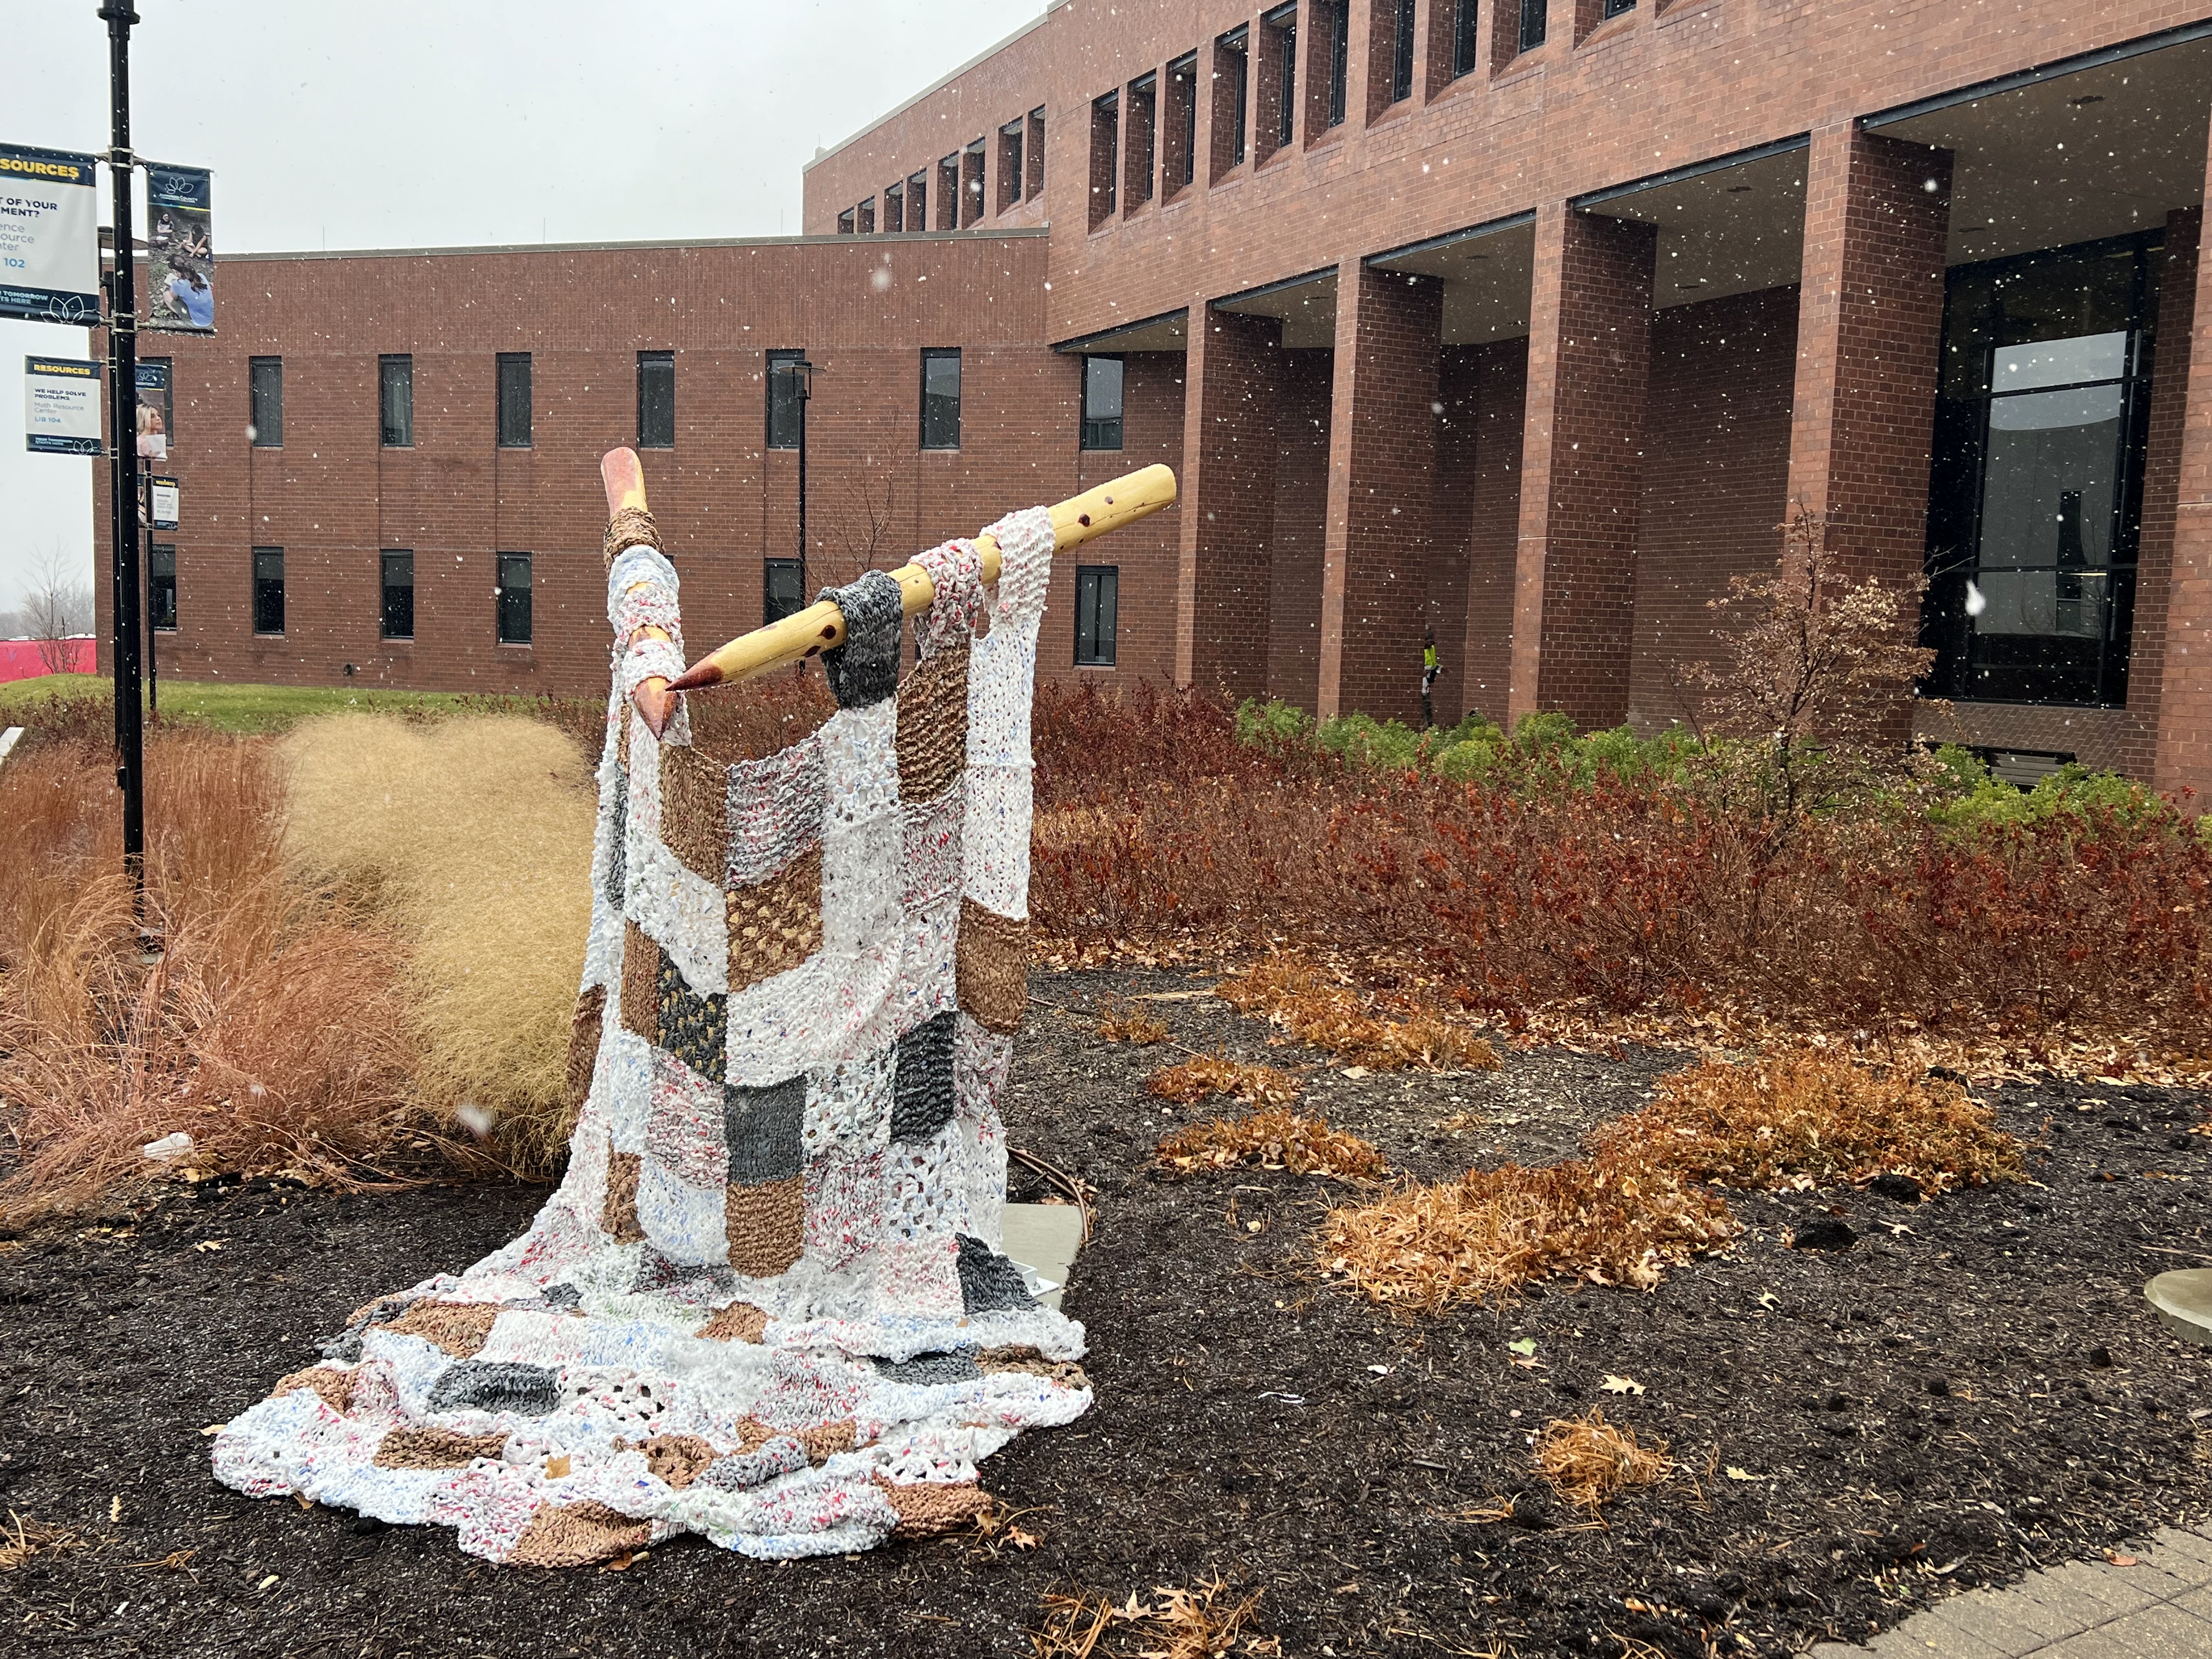 A sculpture made of recycled plastic bags outside an academic building. The sculpture looks a lot like a piece of knitting on large wooden knitting needles.